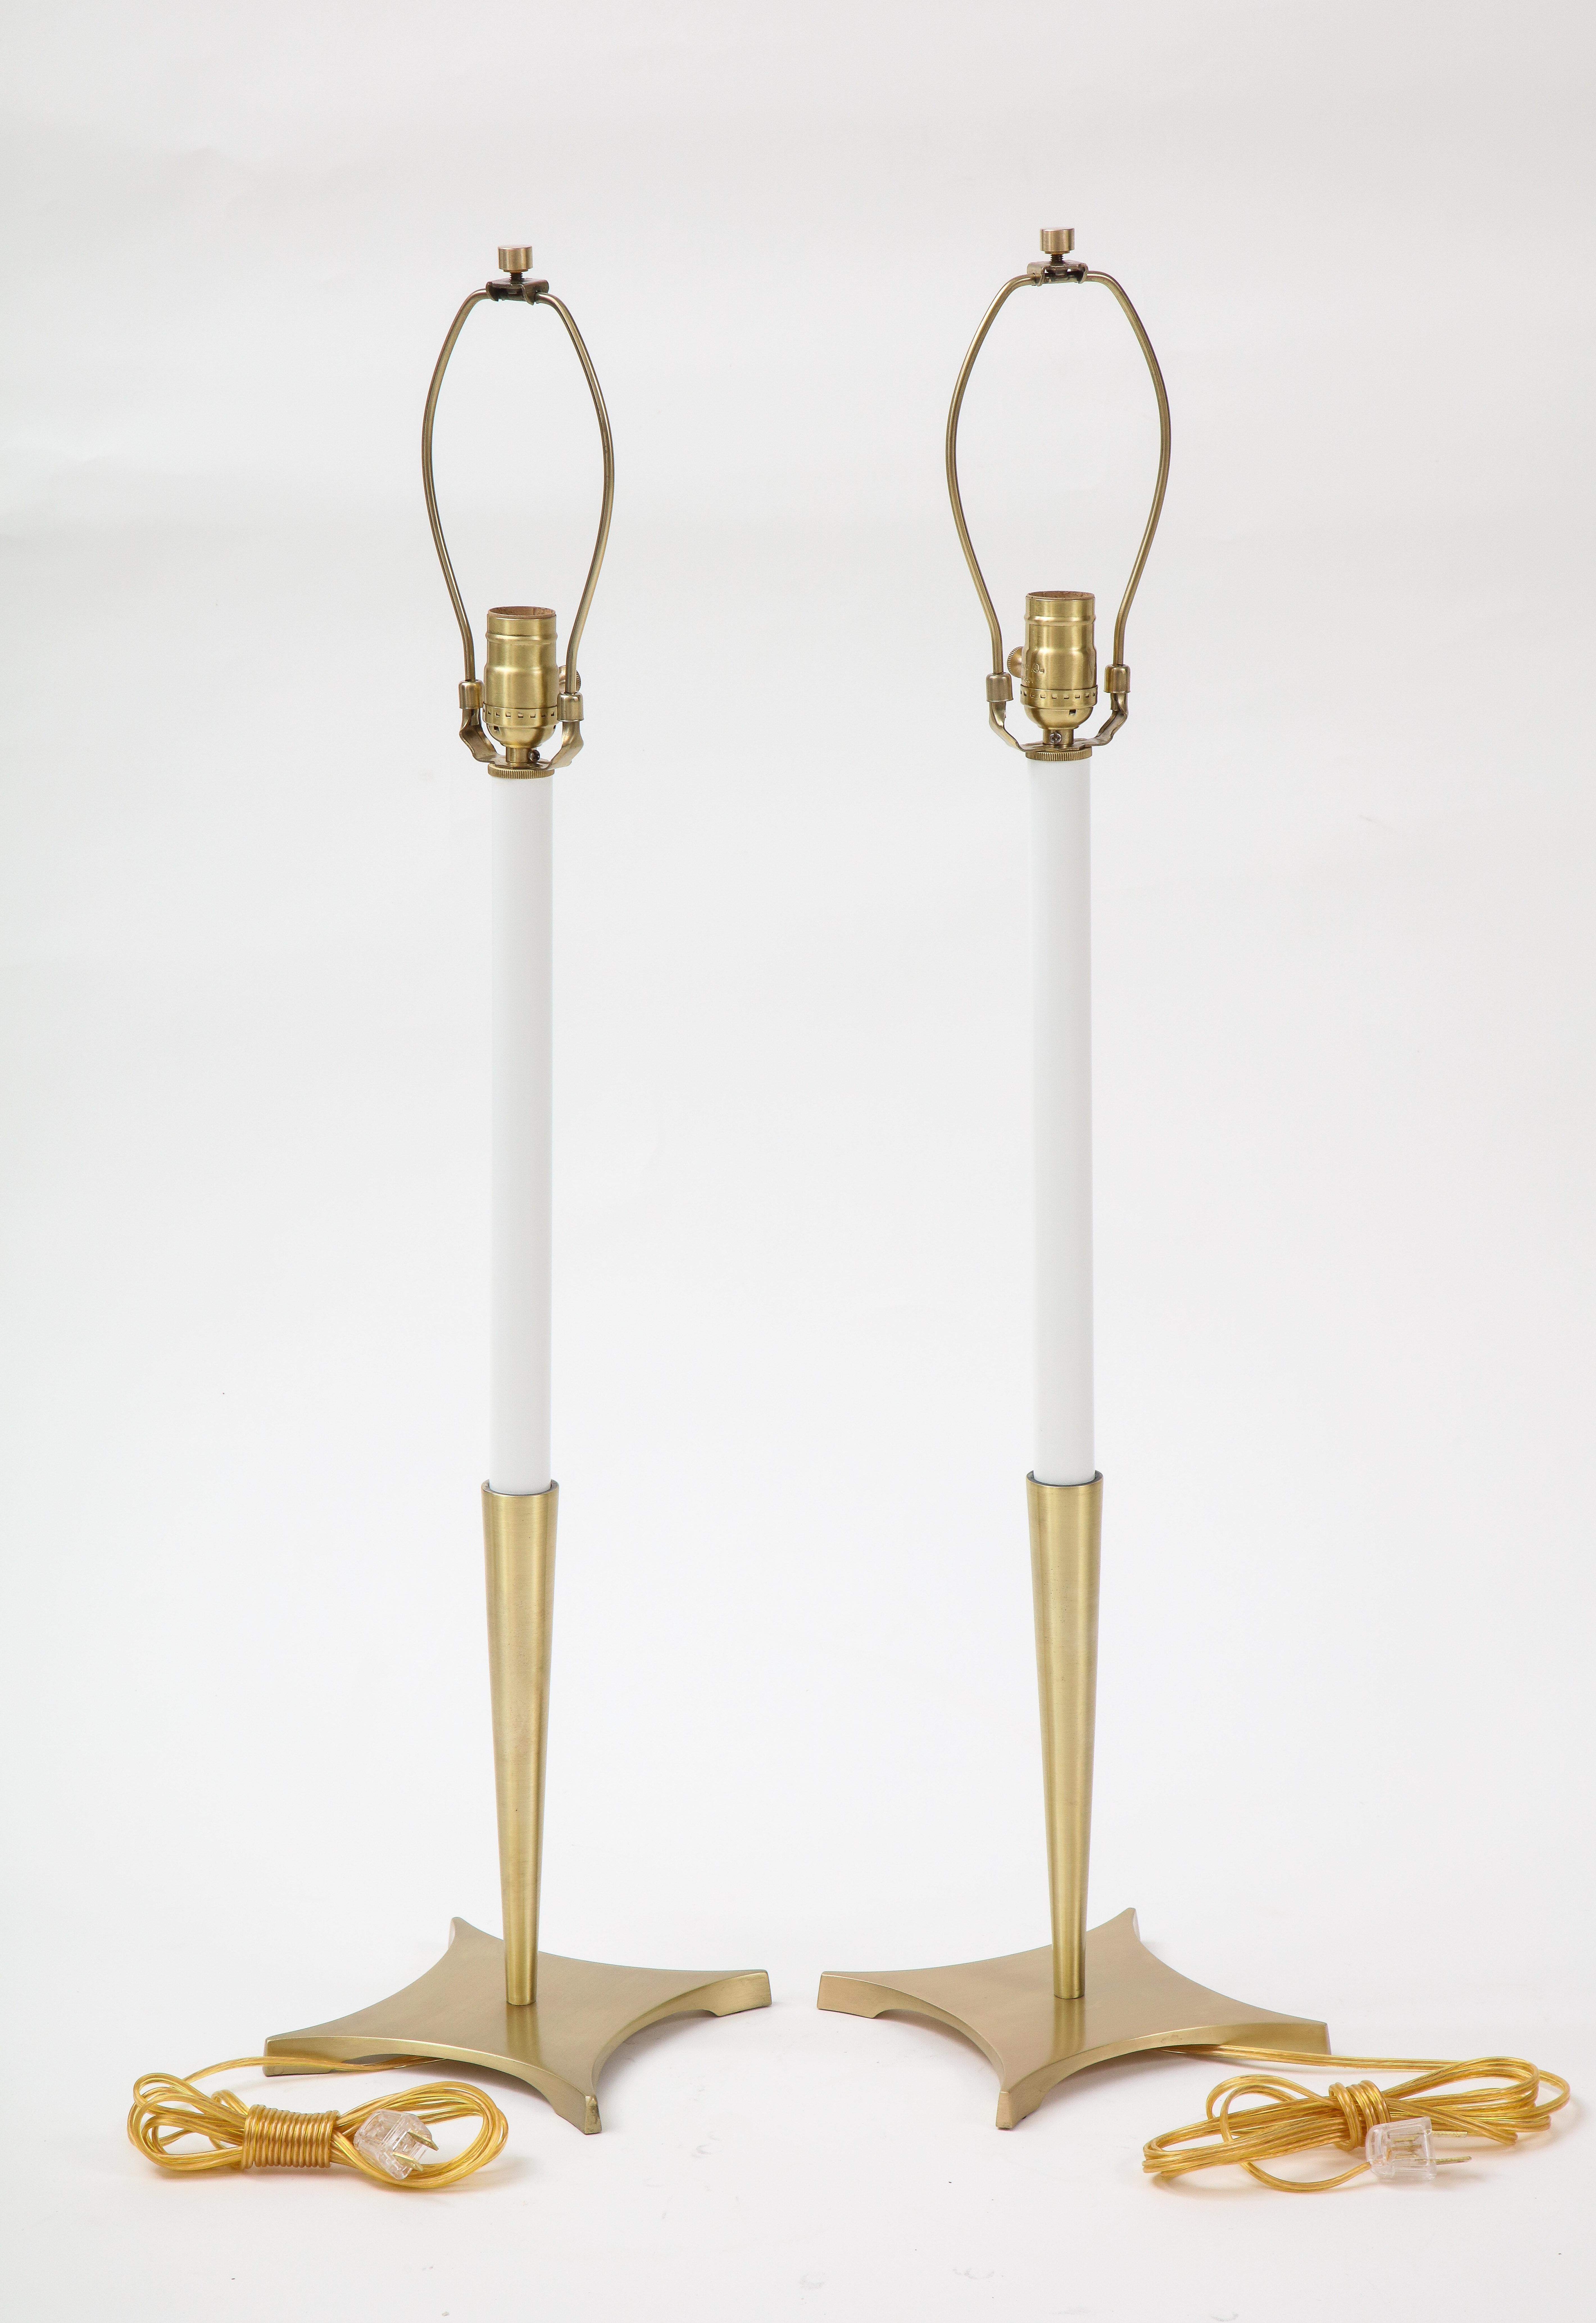 American Classical Stiffel Brass Candlestick Lamps For Sale